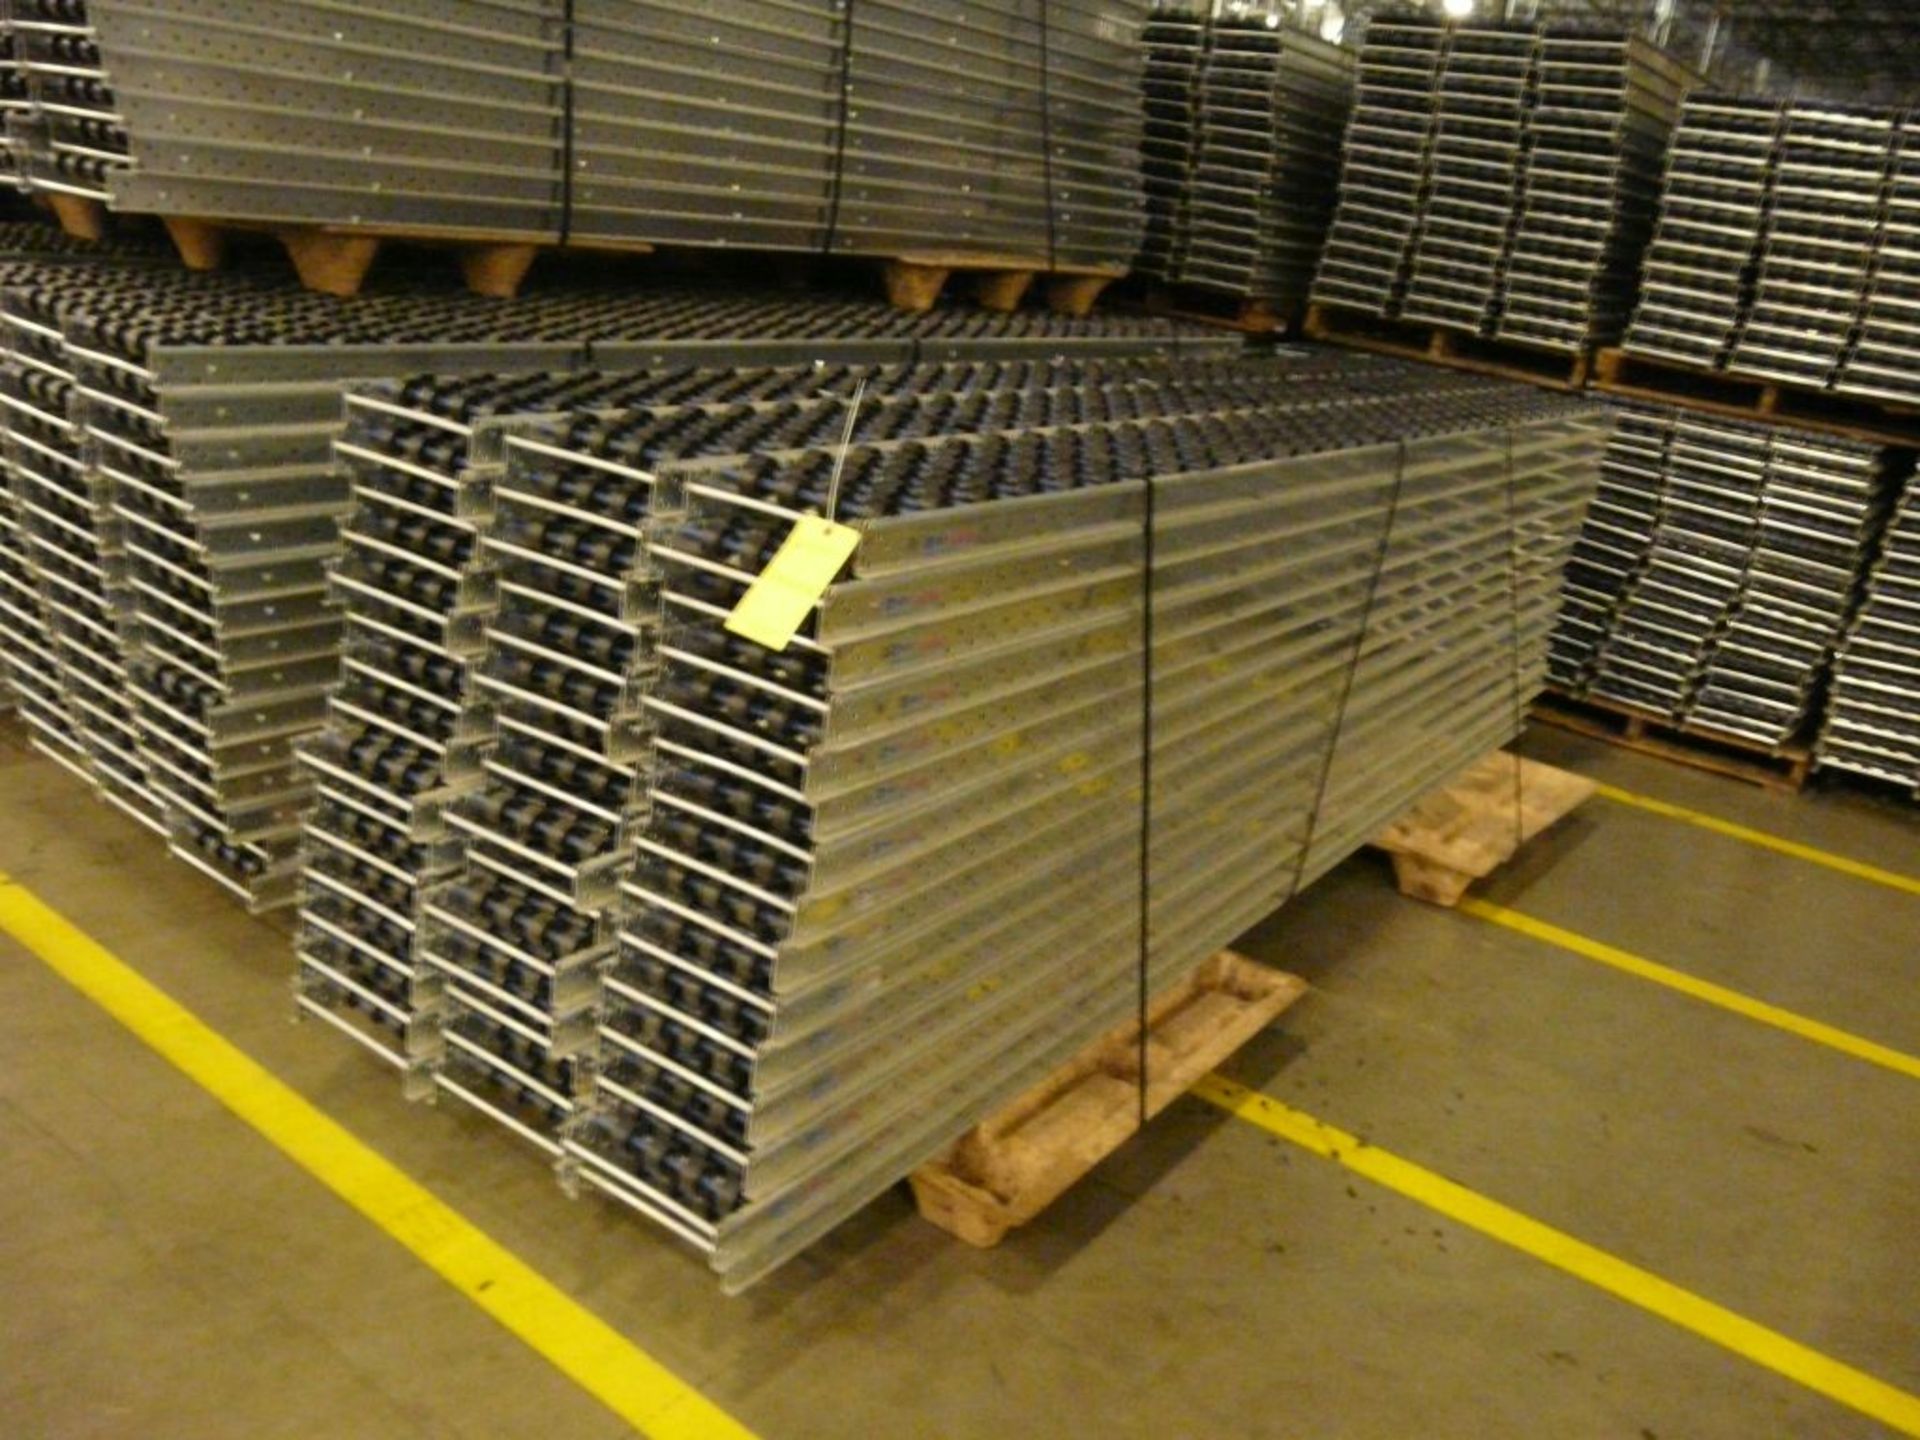 Lot of (90) SpanTrack Wheelbed Carton Flow Conveyors - 11.5'L x 11"W; Tag: 223641 - $30 Lot